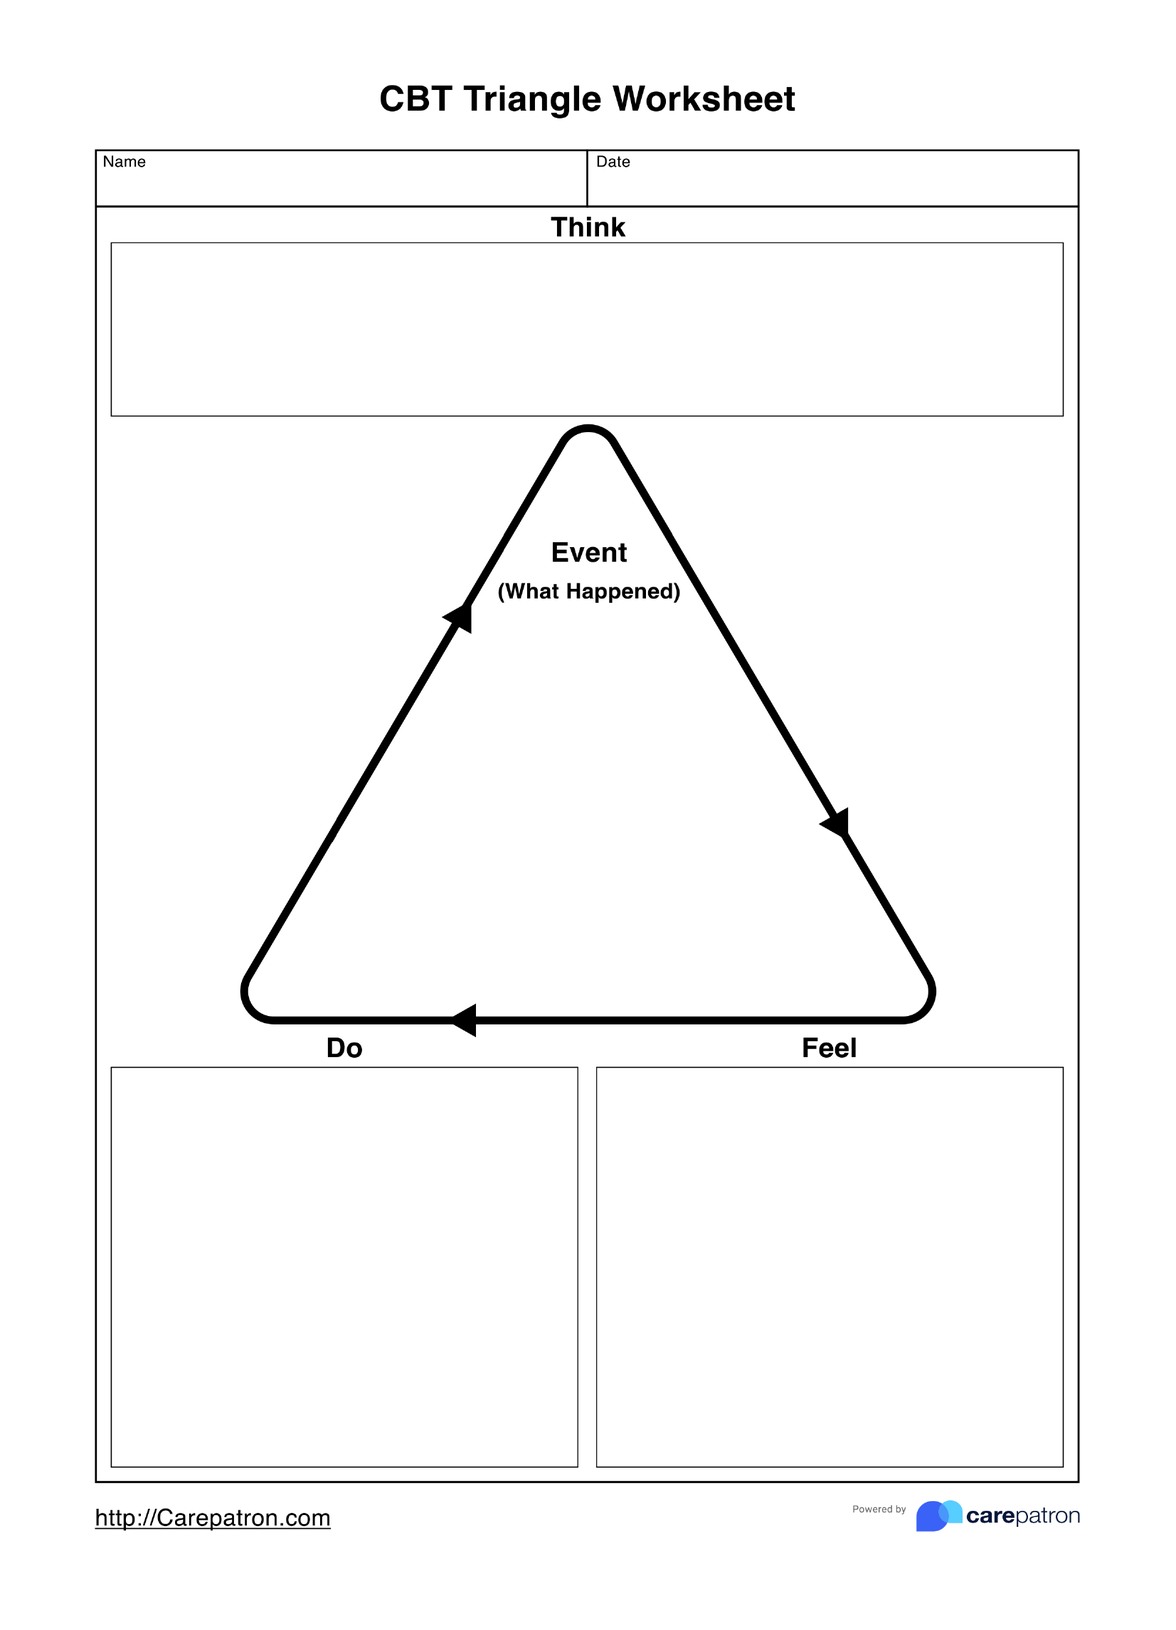 CBT Triangle Worksheets PDF Example